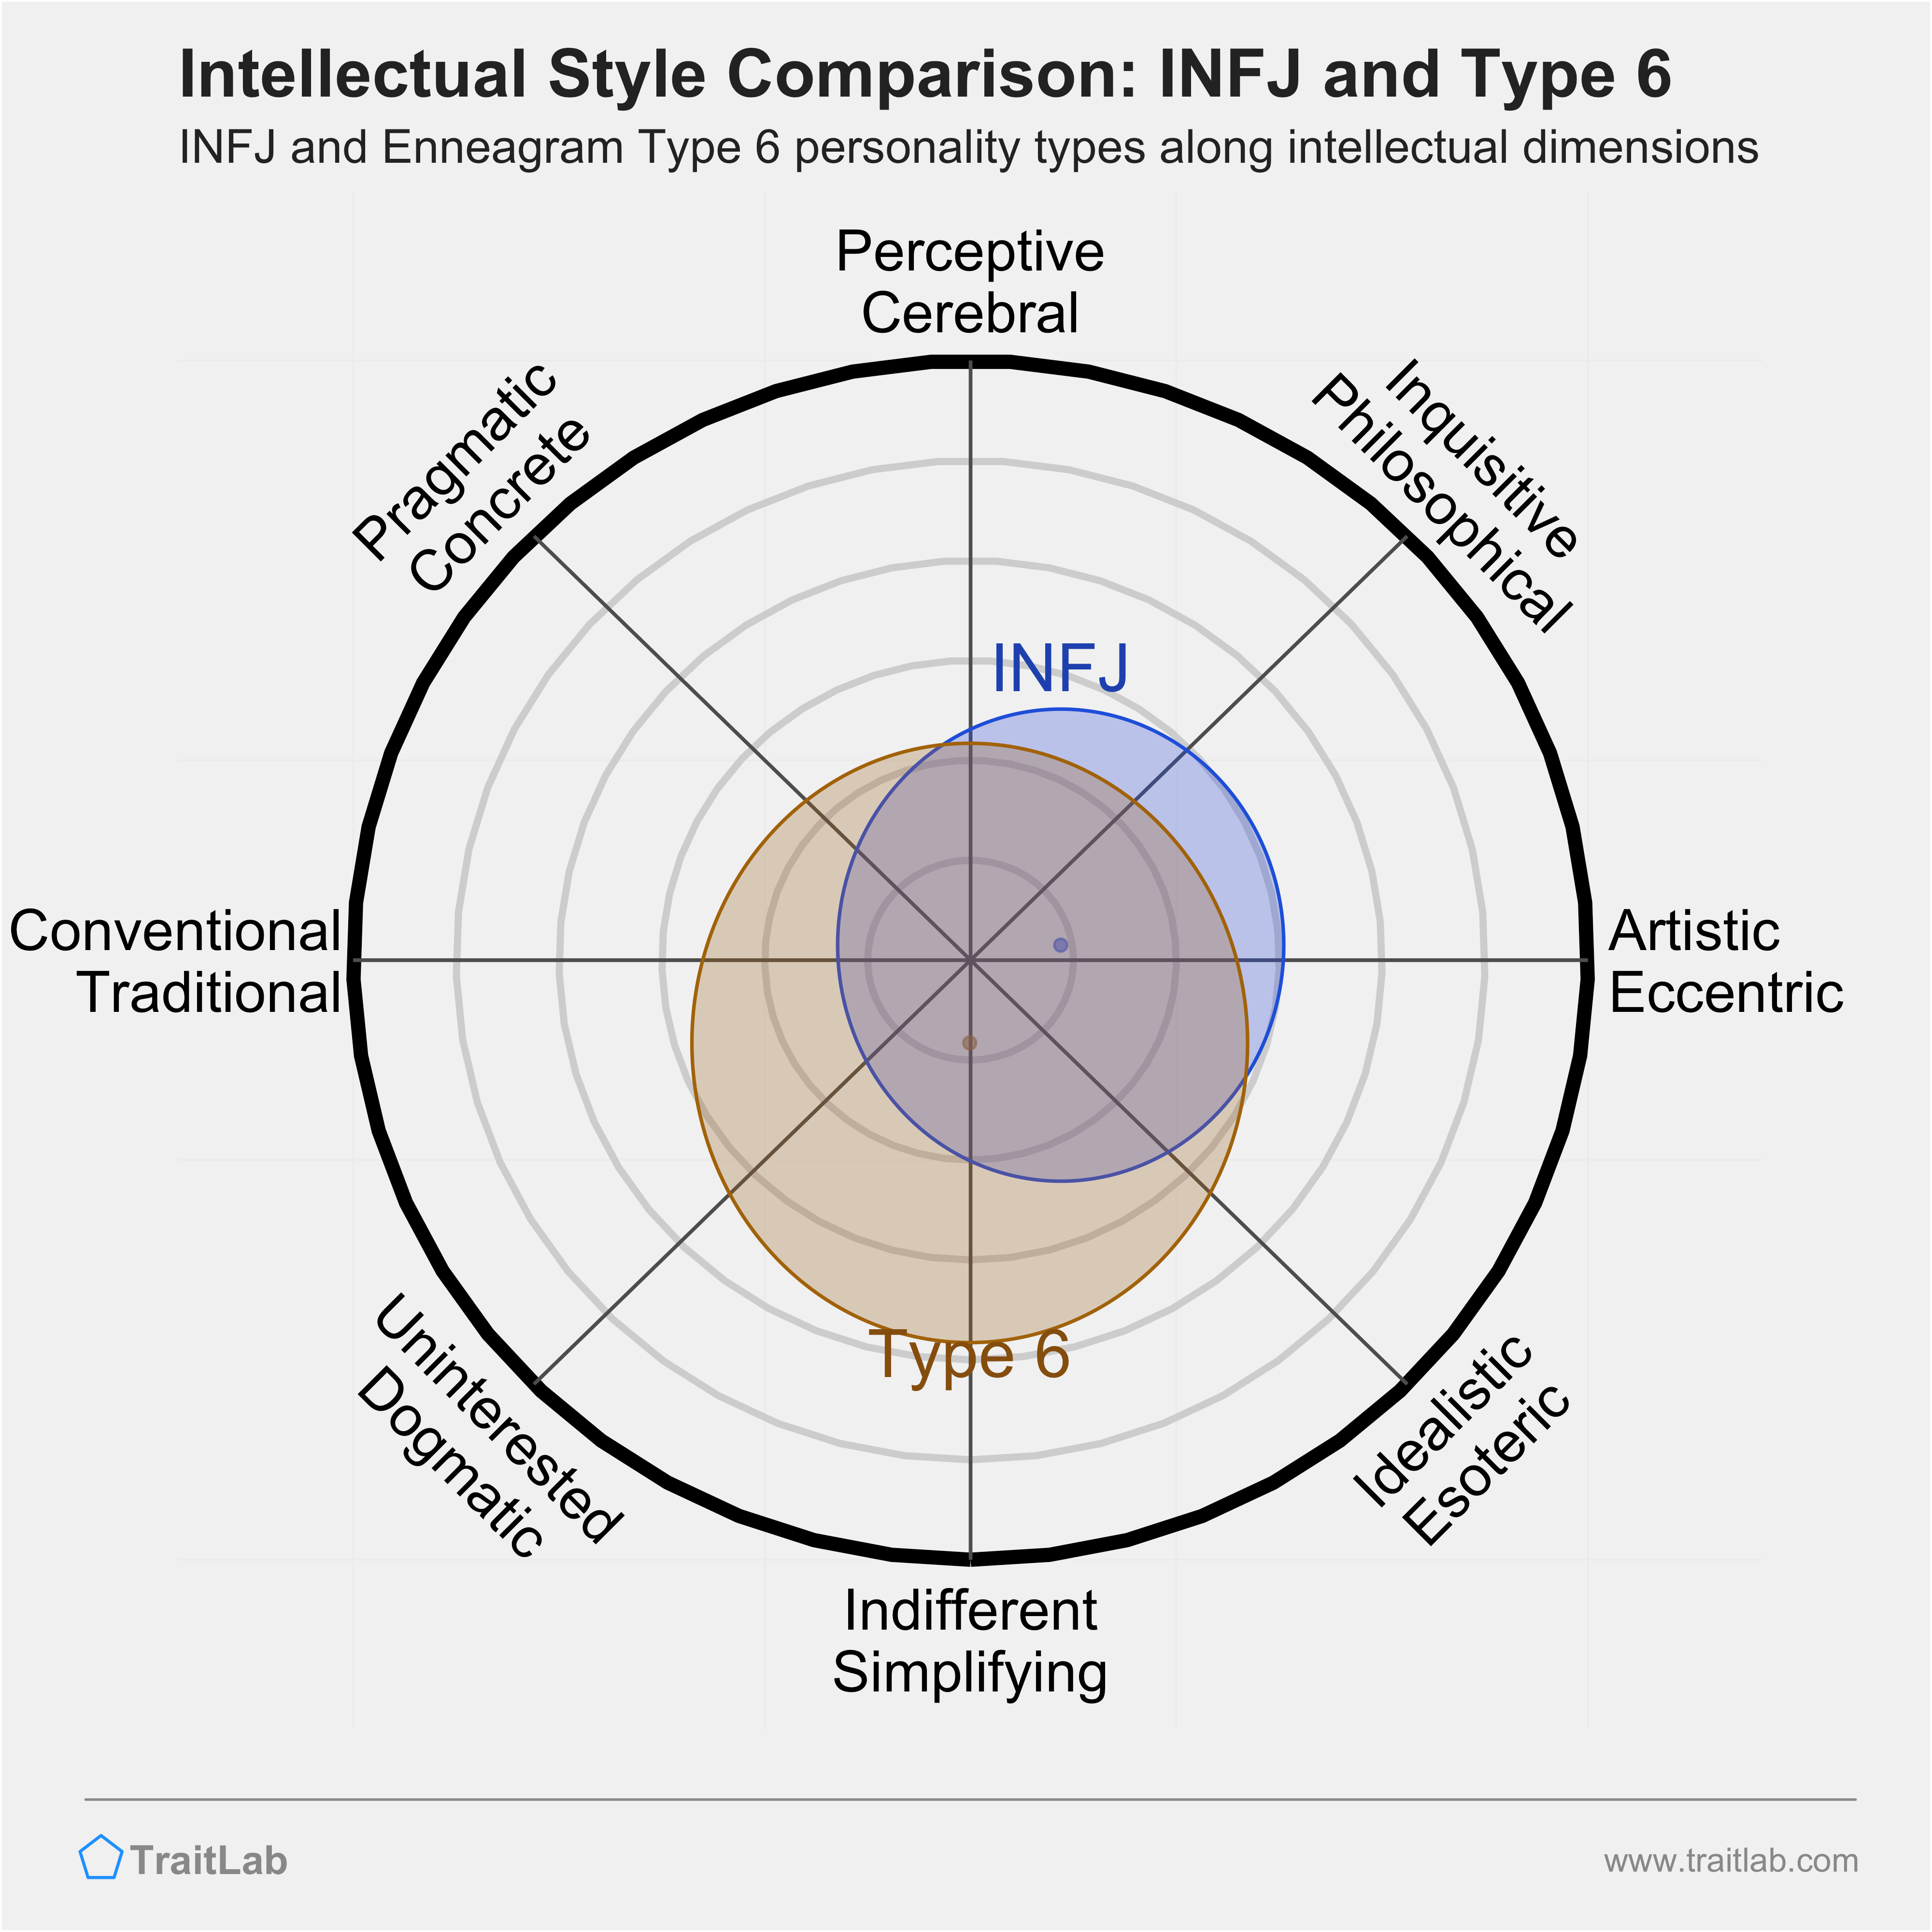 INFJ and Type 6 comparison across intellectual dimensions